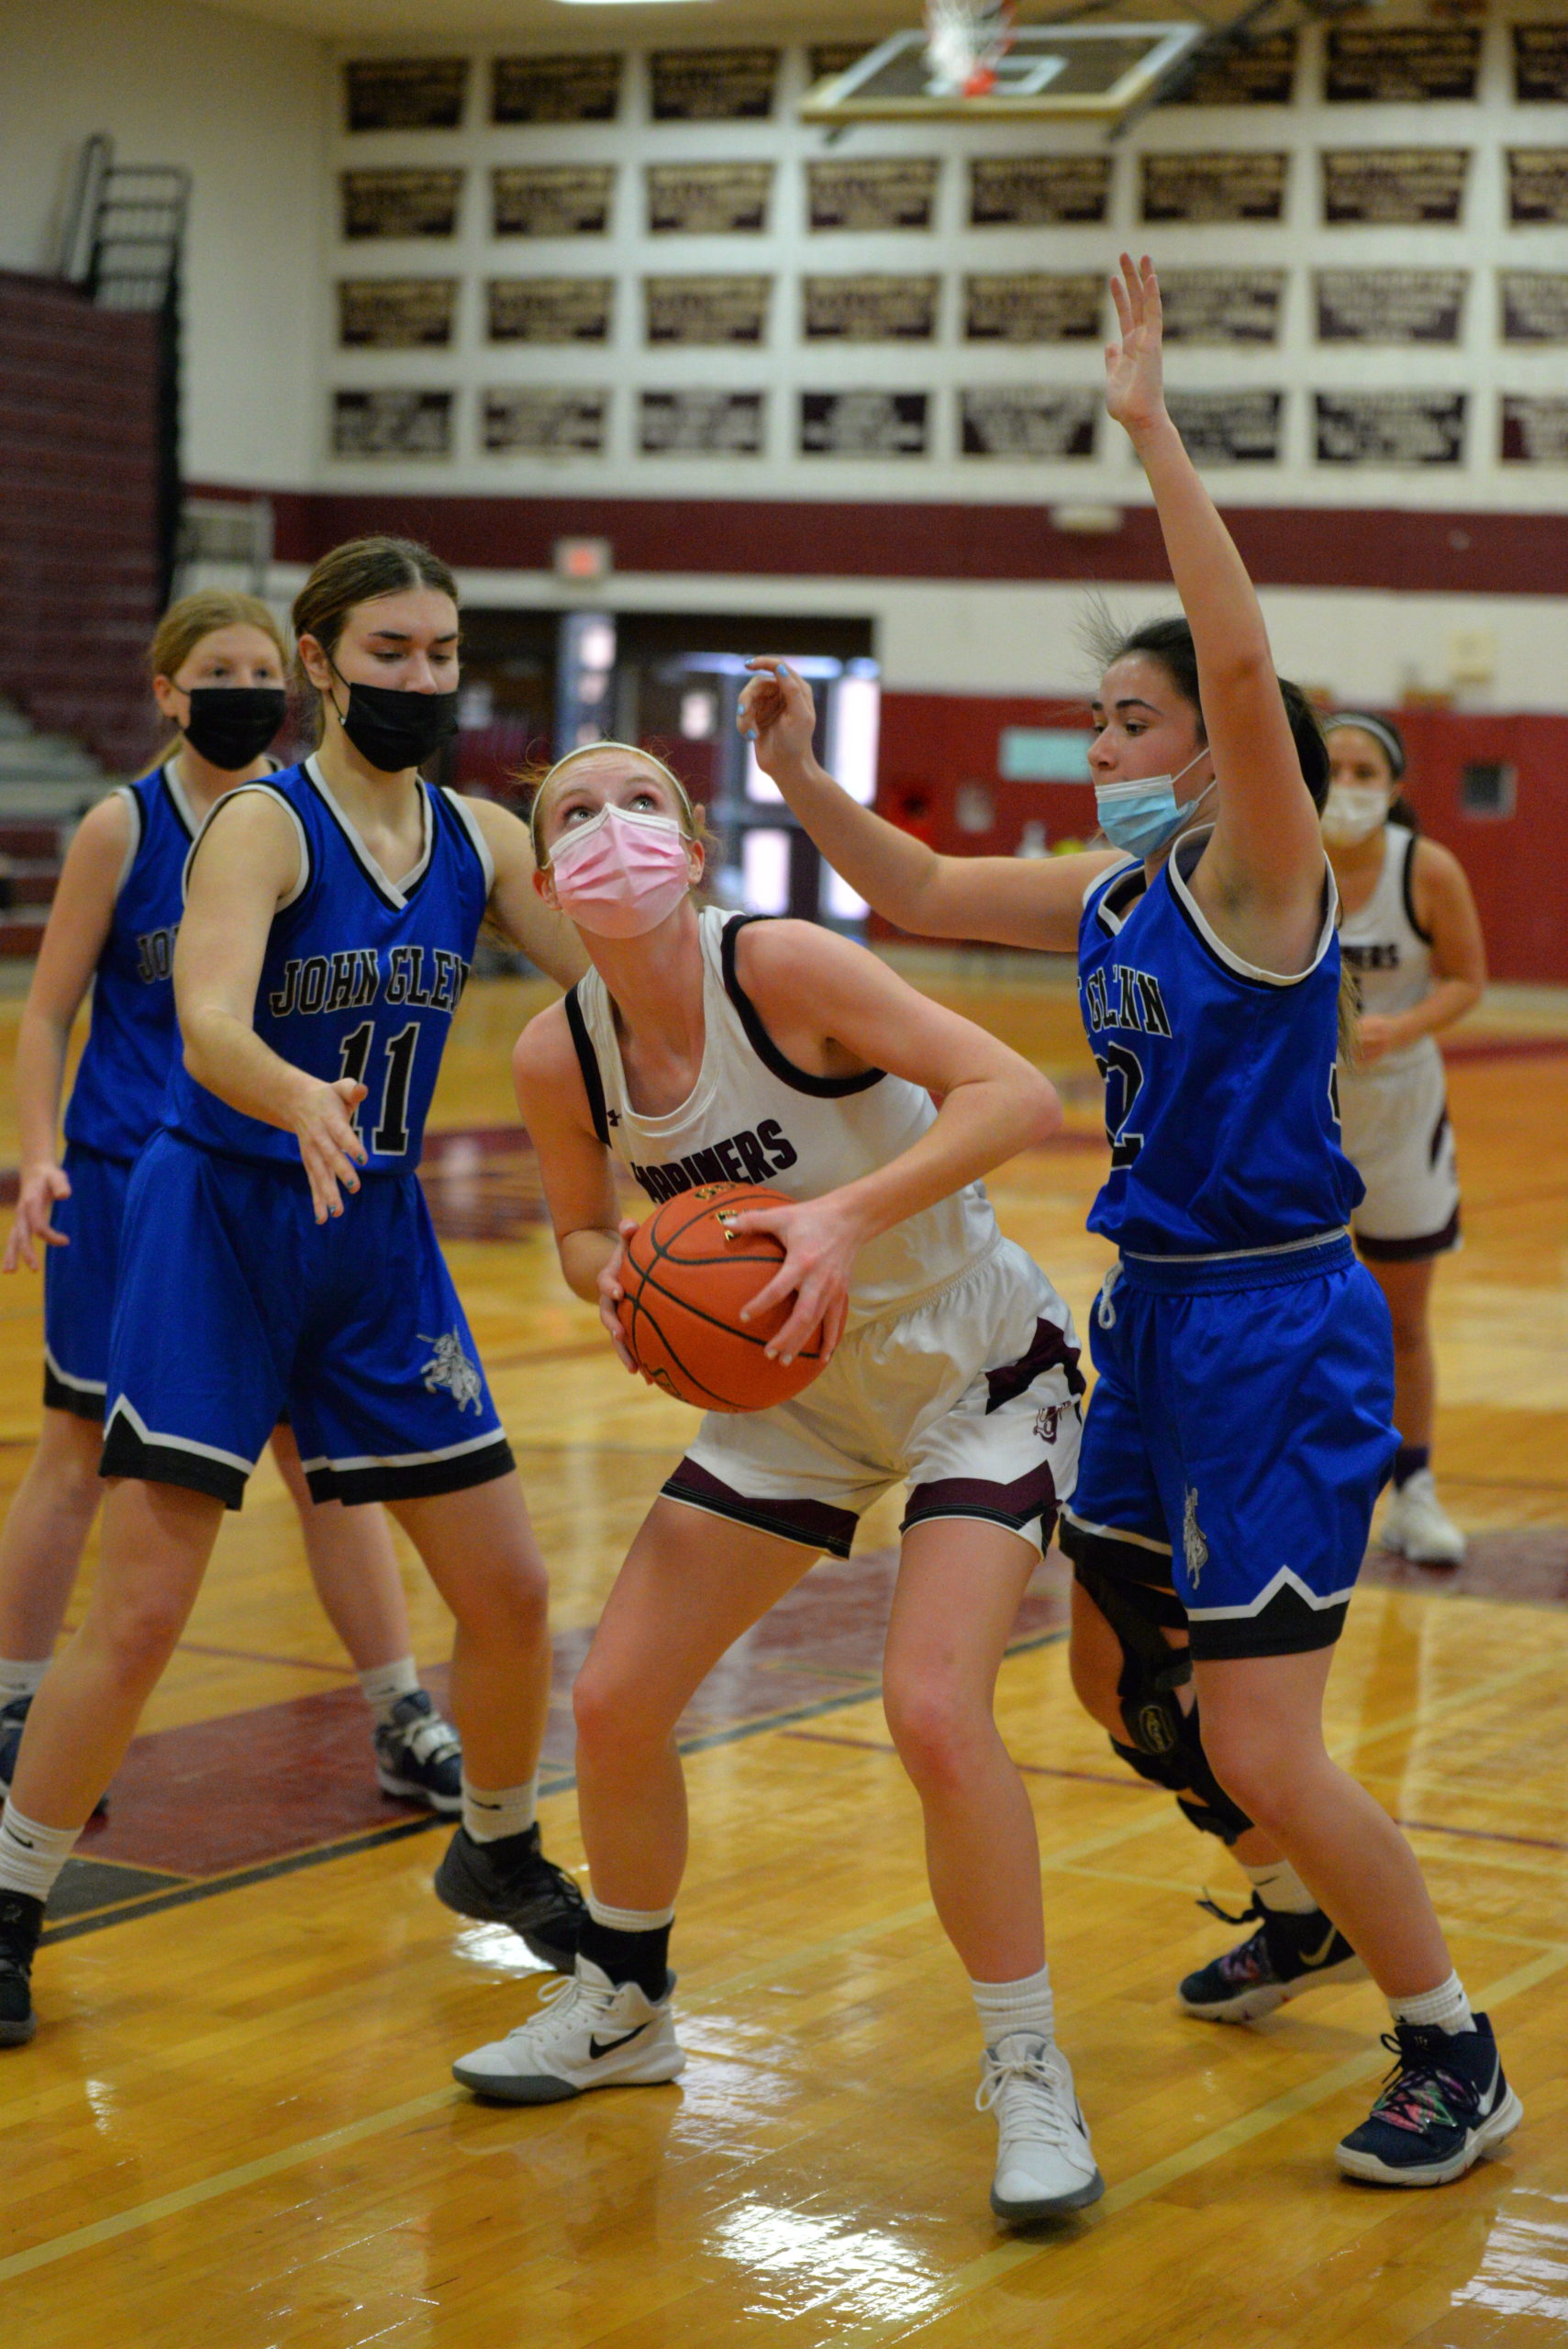 Lady Mariner Carly Cameron looks to go up for two points against Elwood/John Glenn defenders.